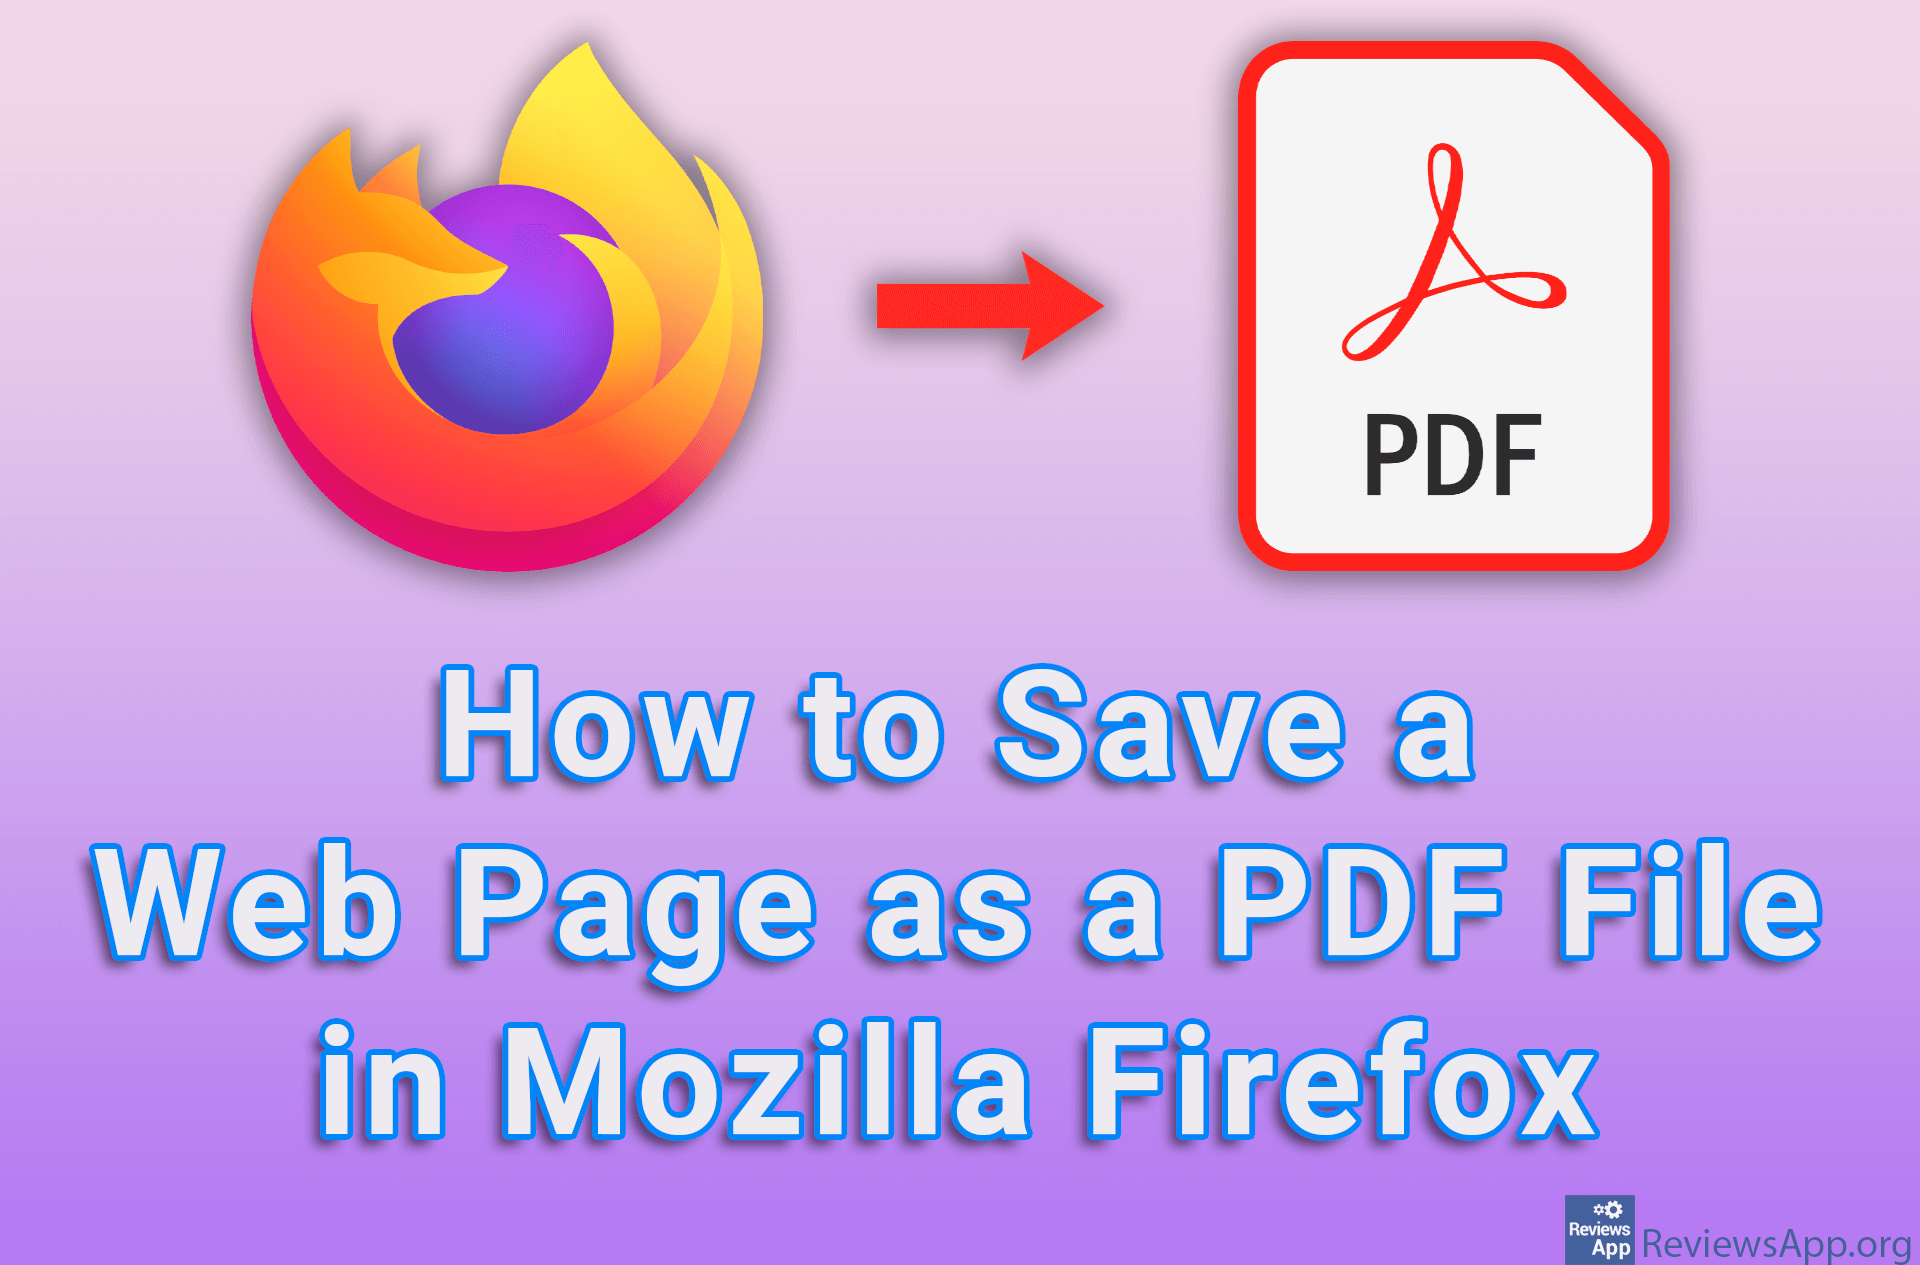 How to Save a Web Page as a PDF File in Mozilla Firefox